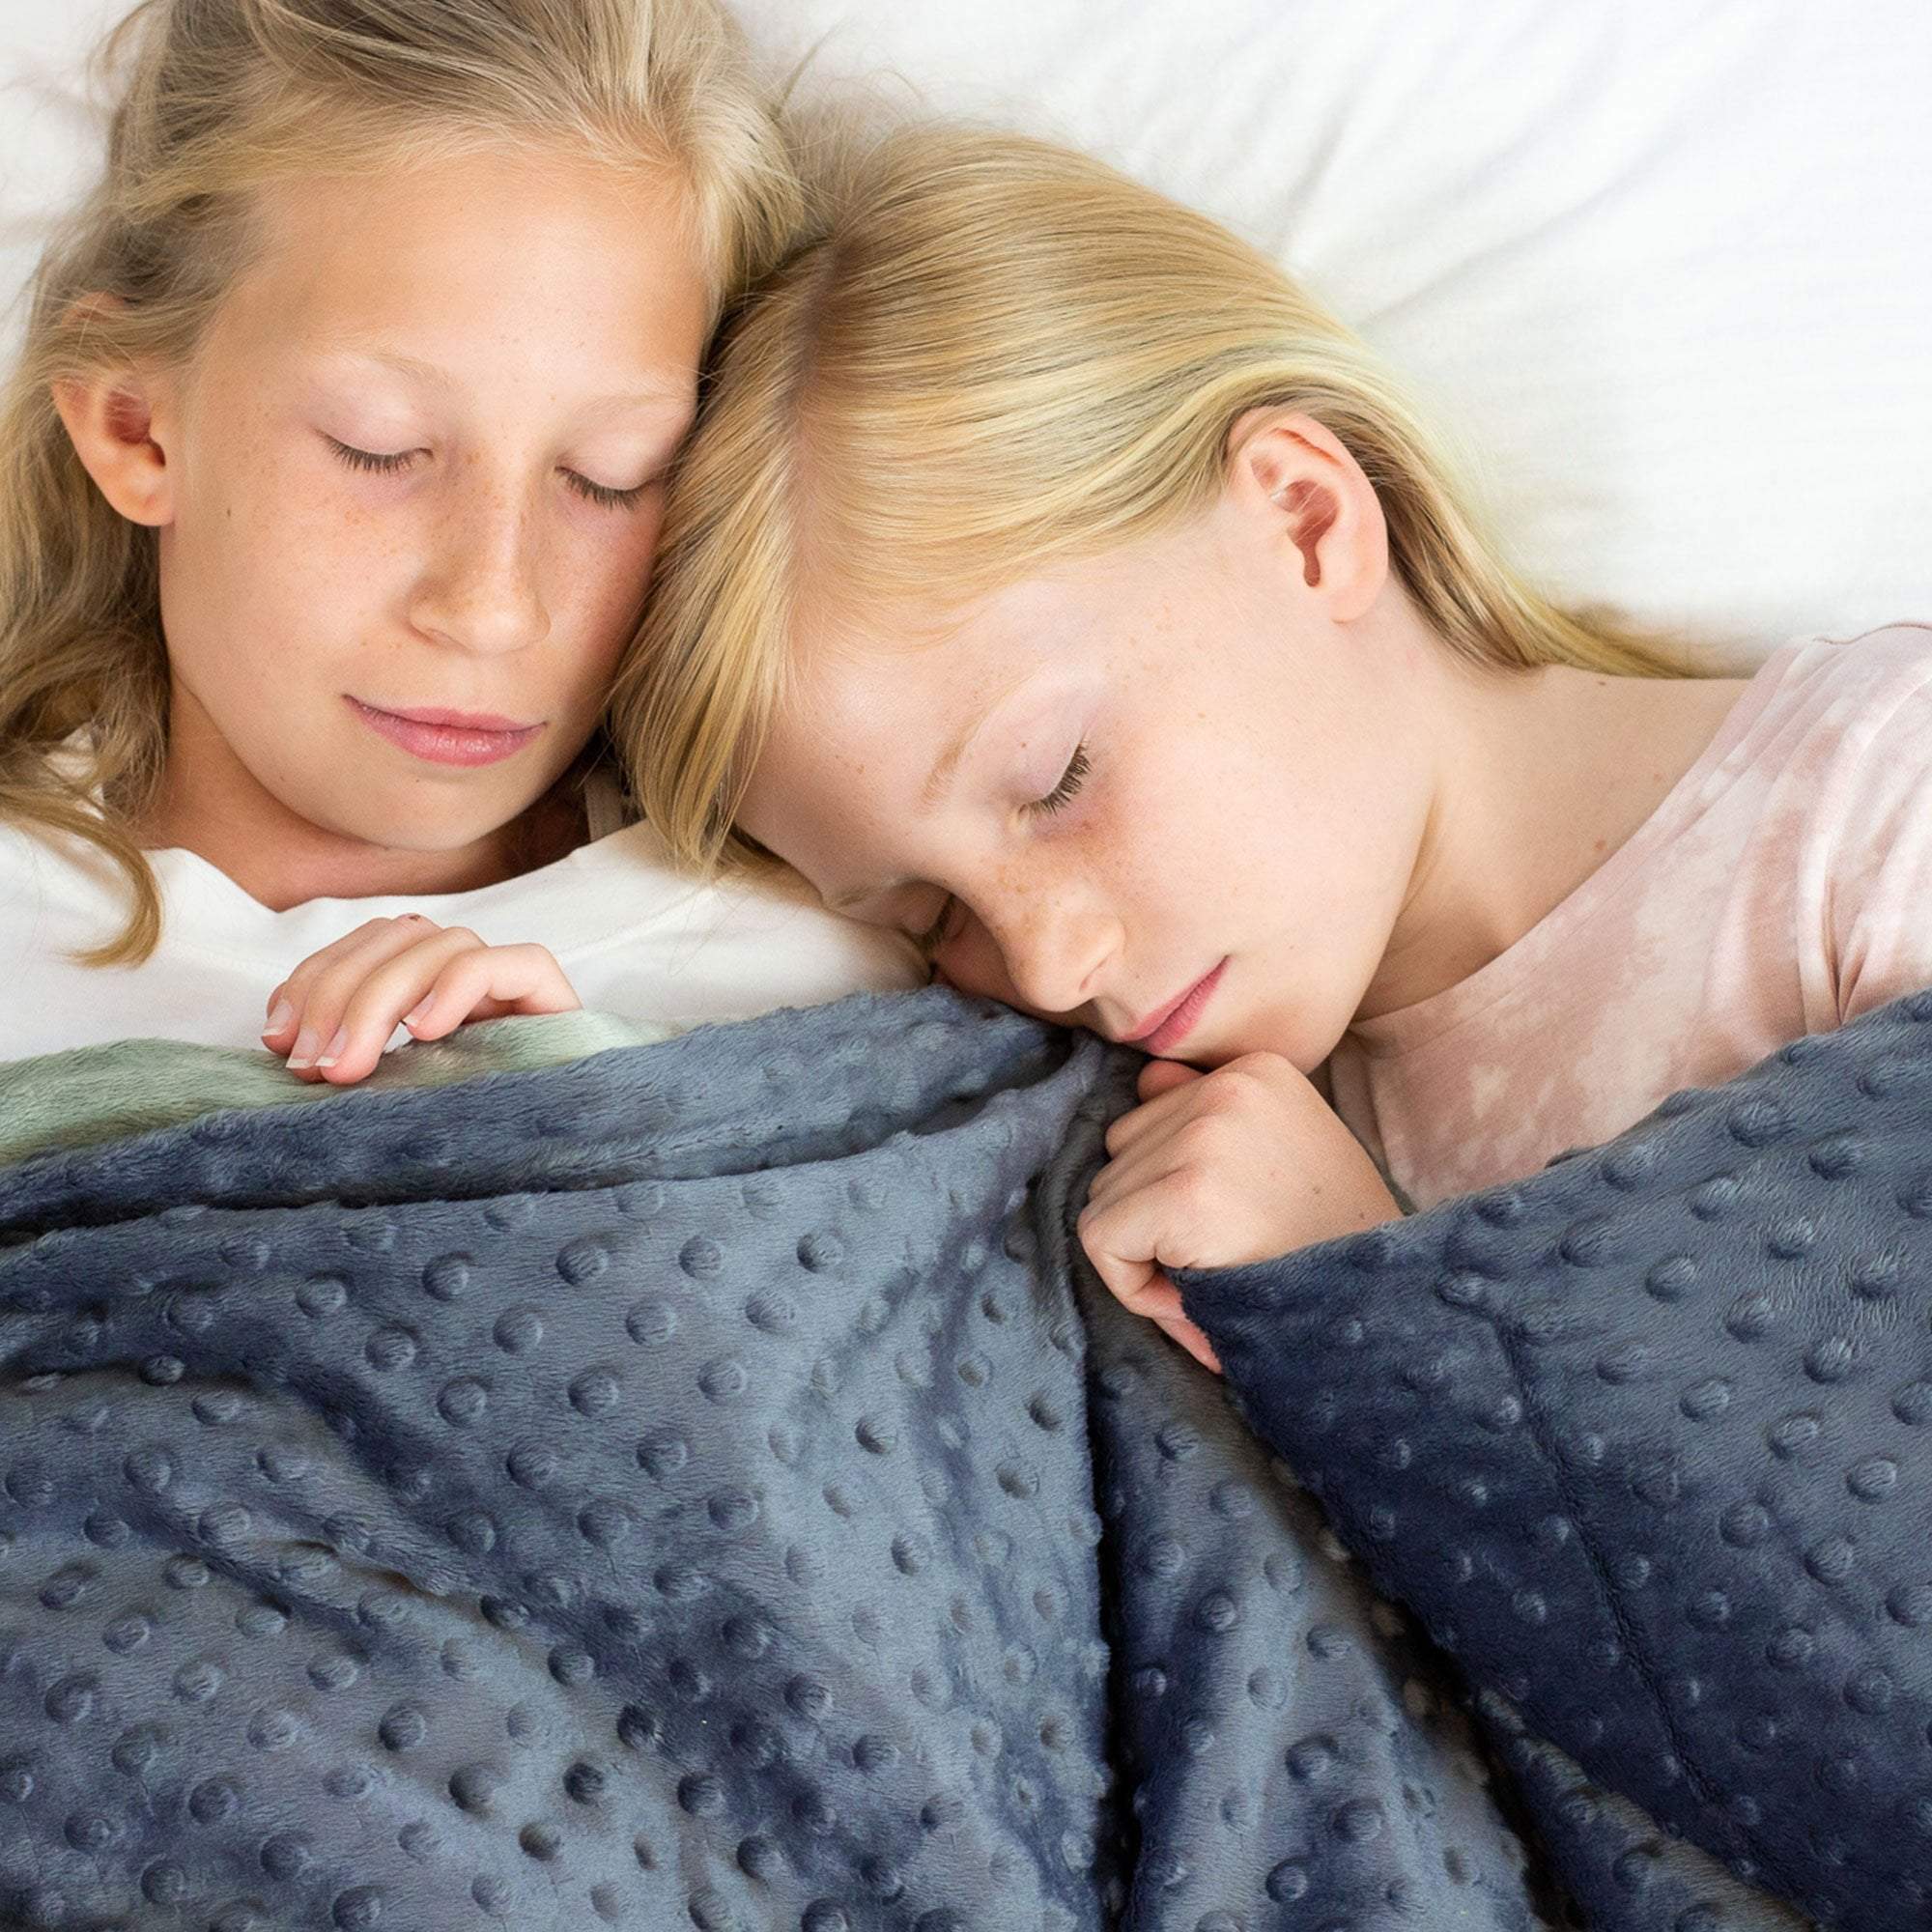 Buy a Weighted Blanket for Kids | FREE Shipping | Harkla